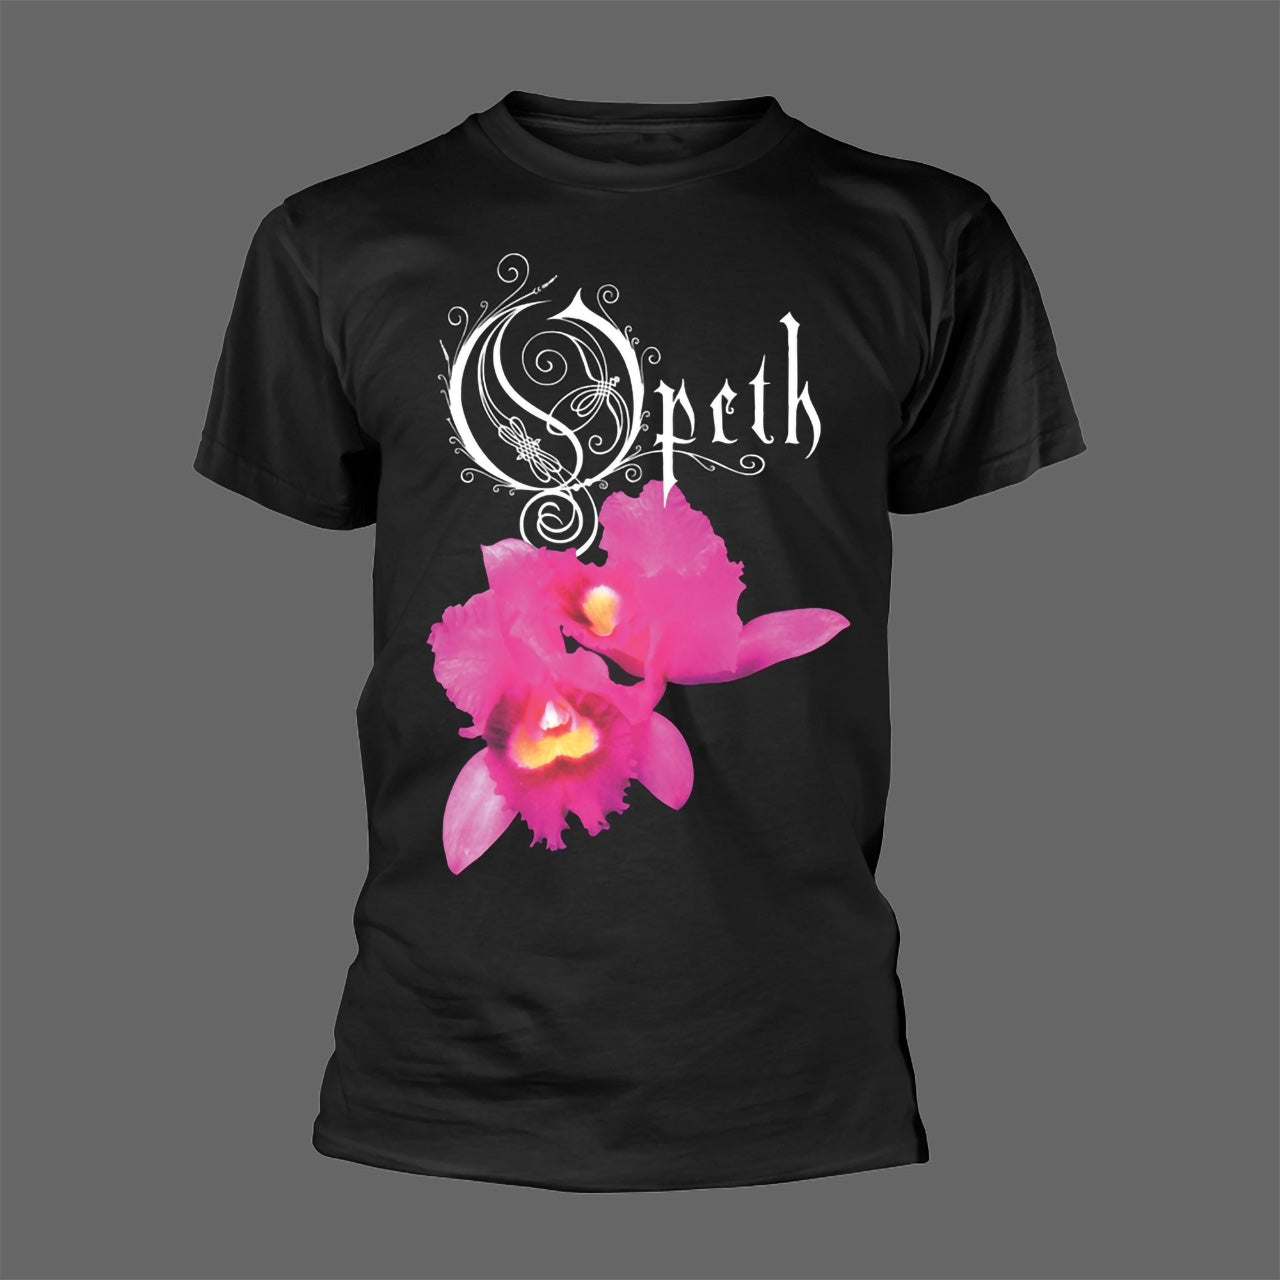 Opeth - Orchid (T-Shirt)